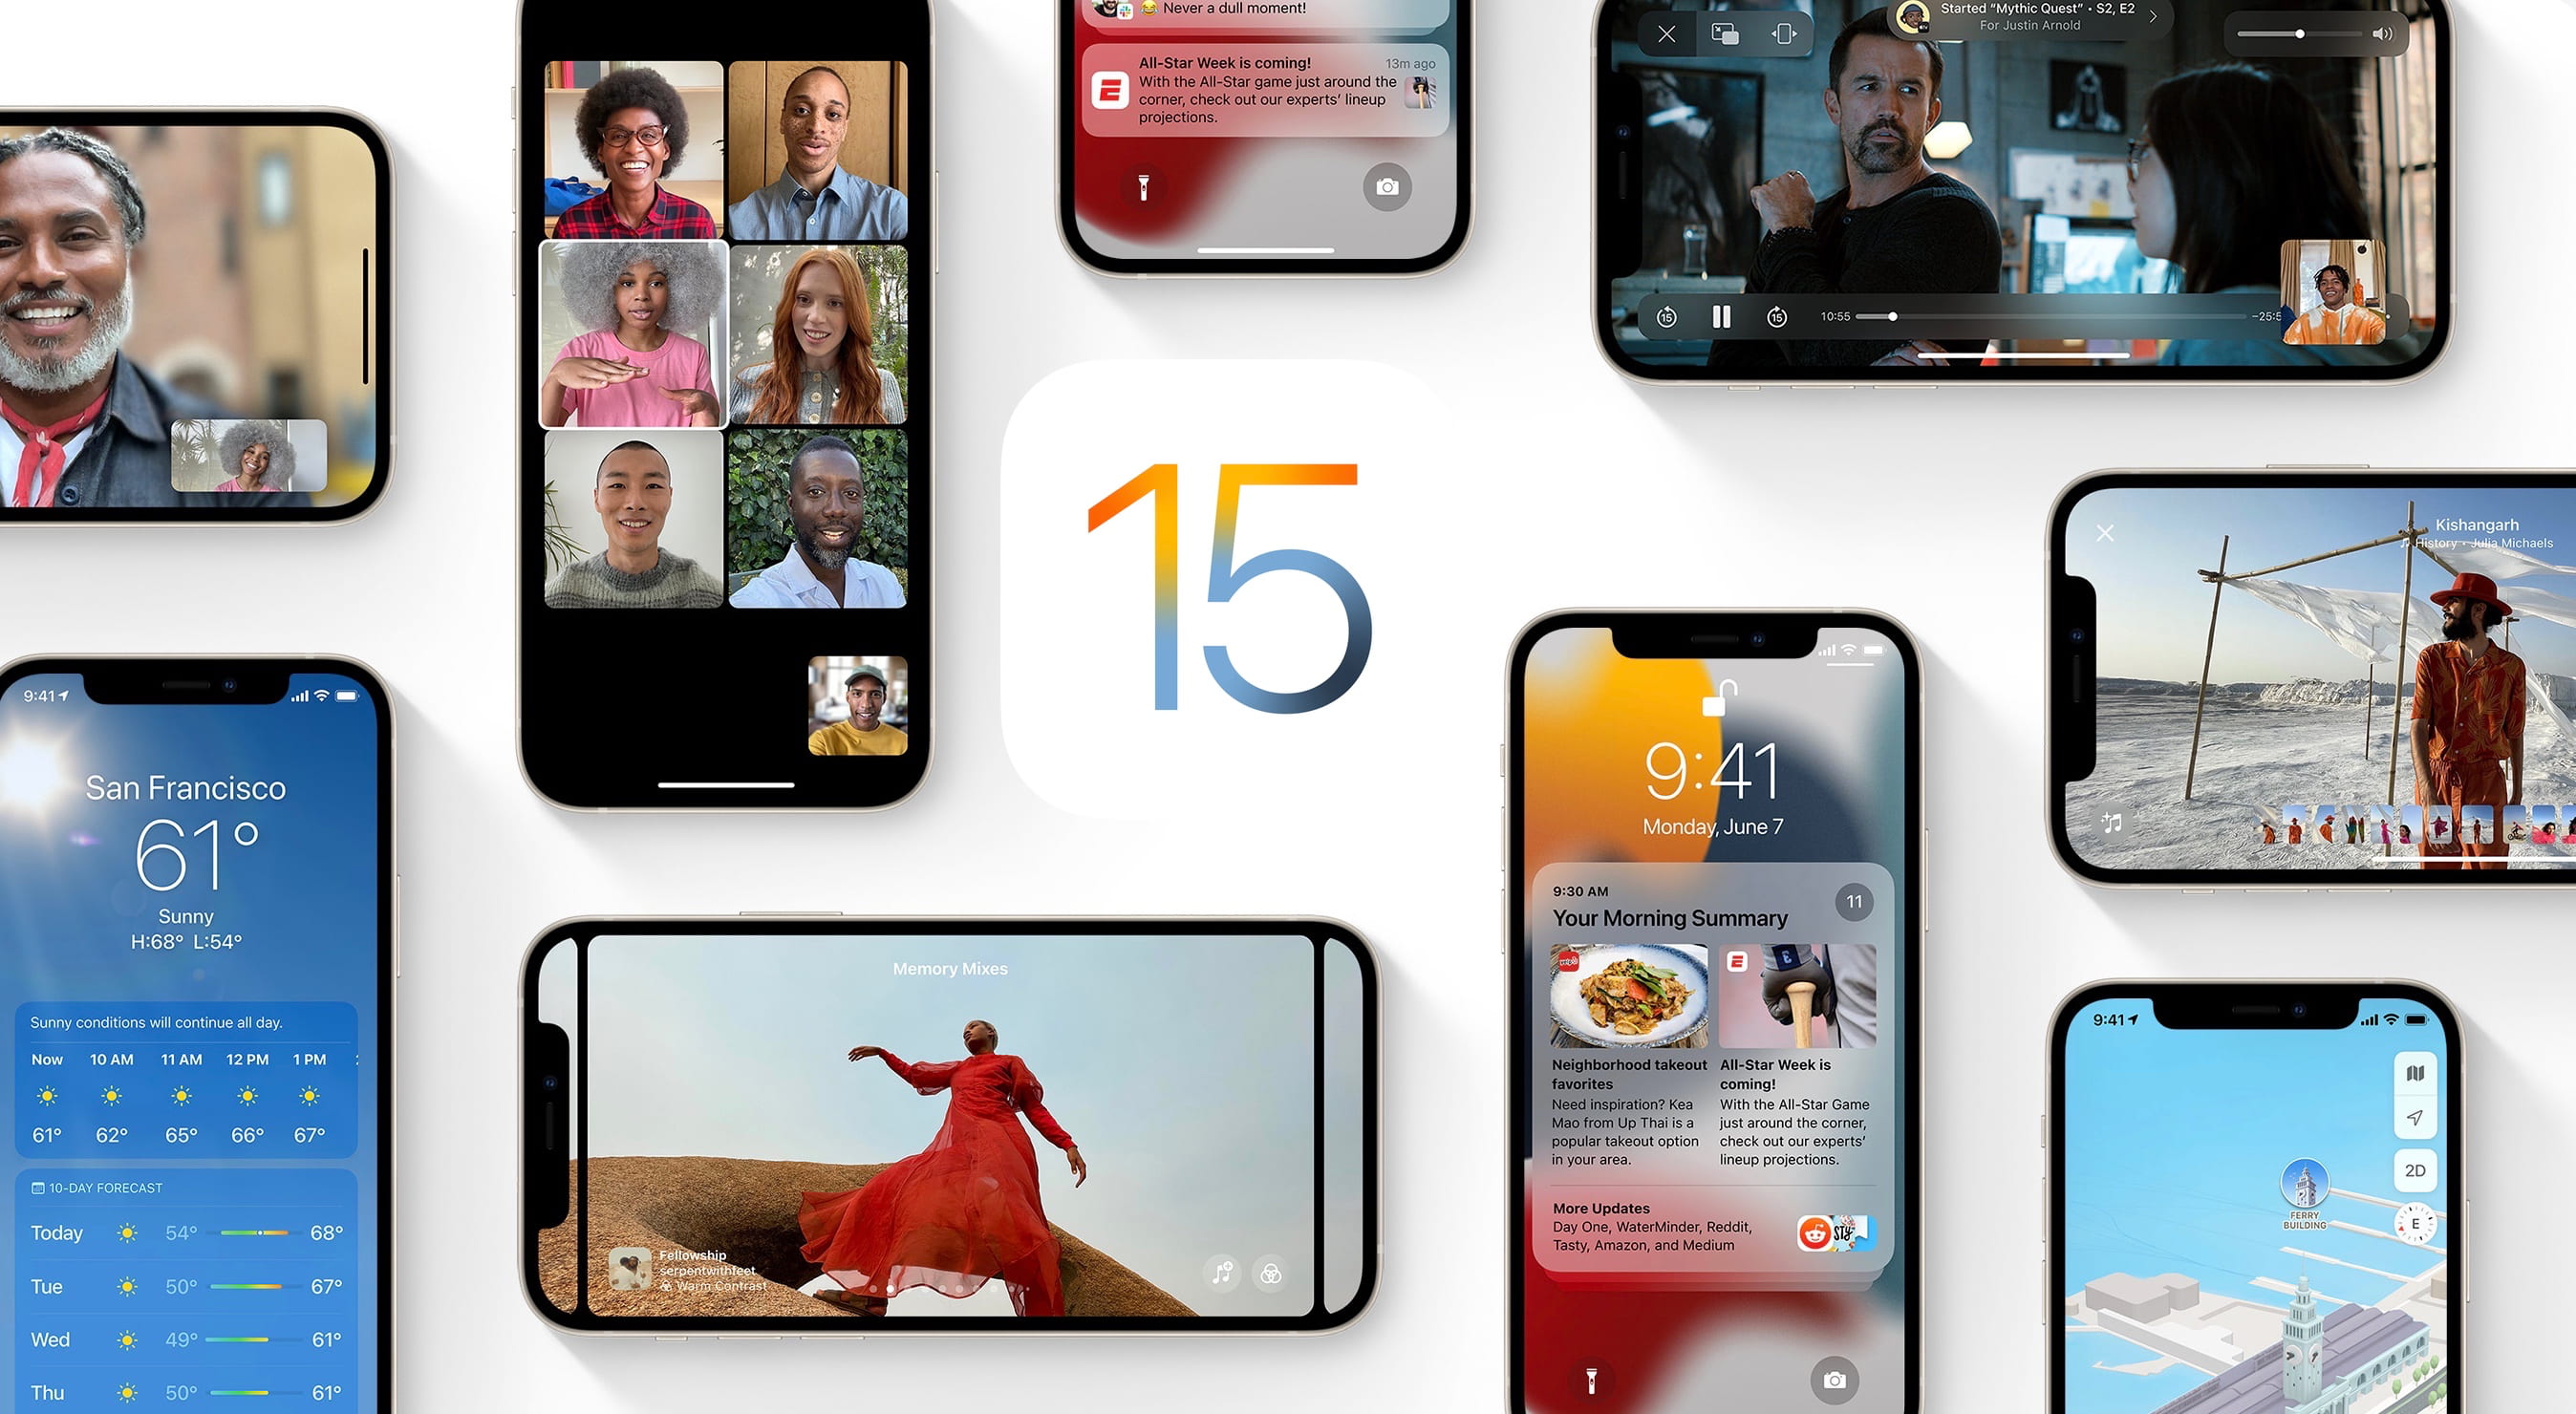 Apple's marketing image showing a bunch of iPhone and iPod touch devices showcasing various iOS 15 features